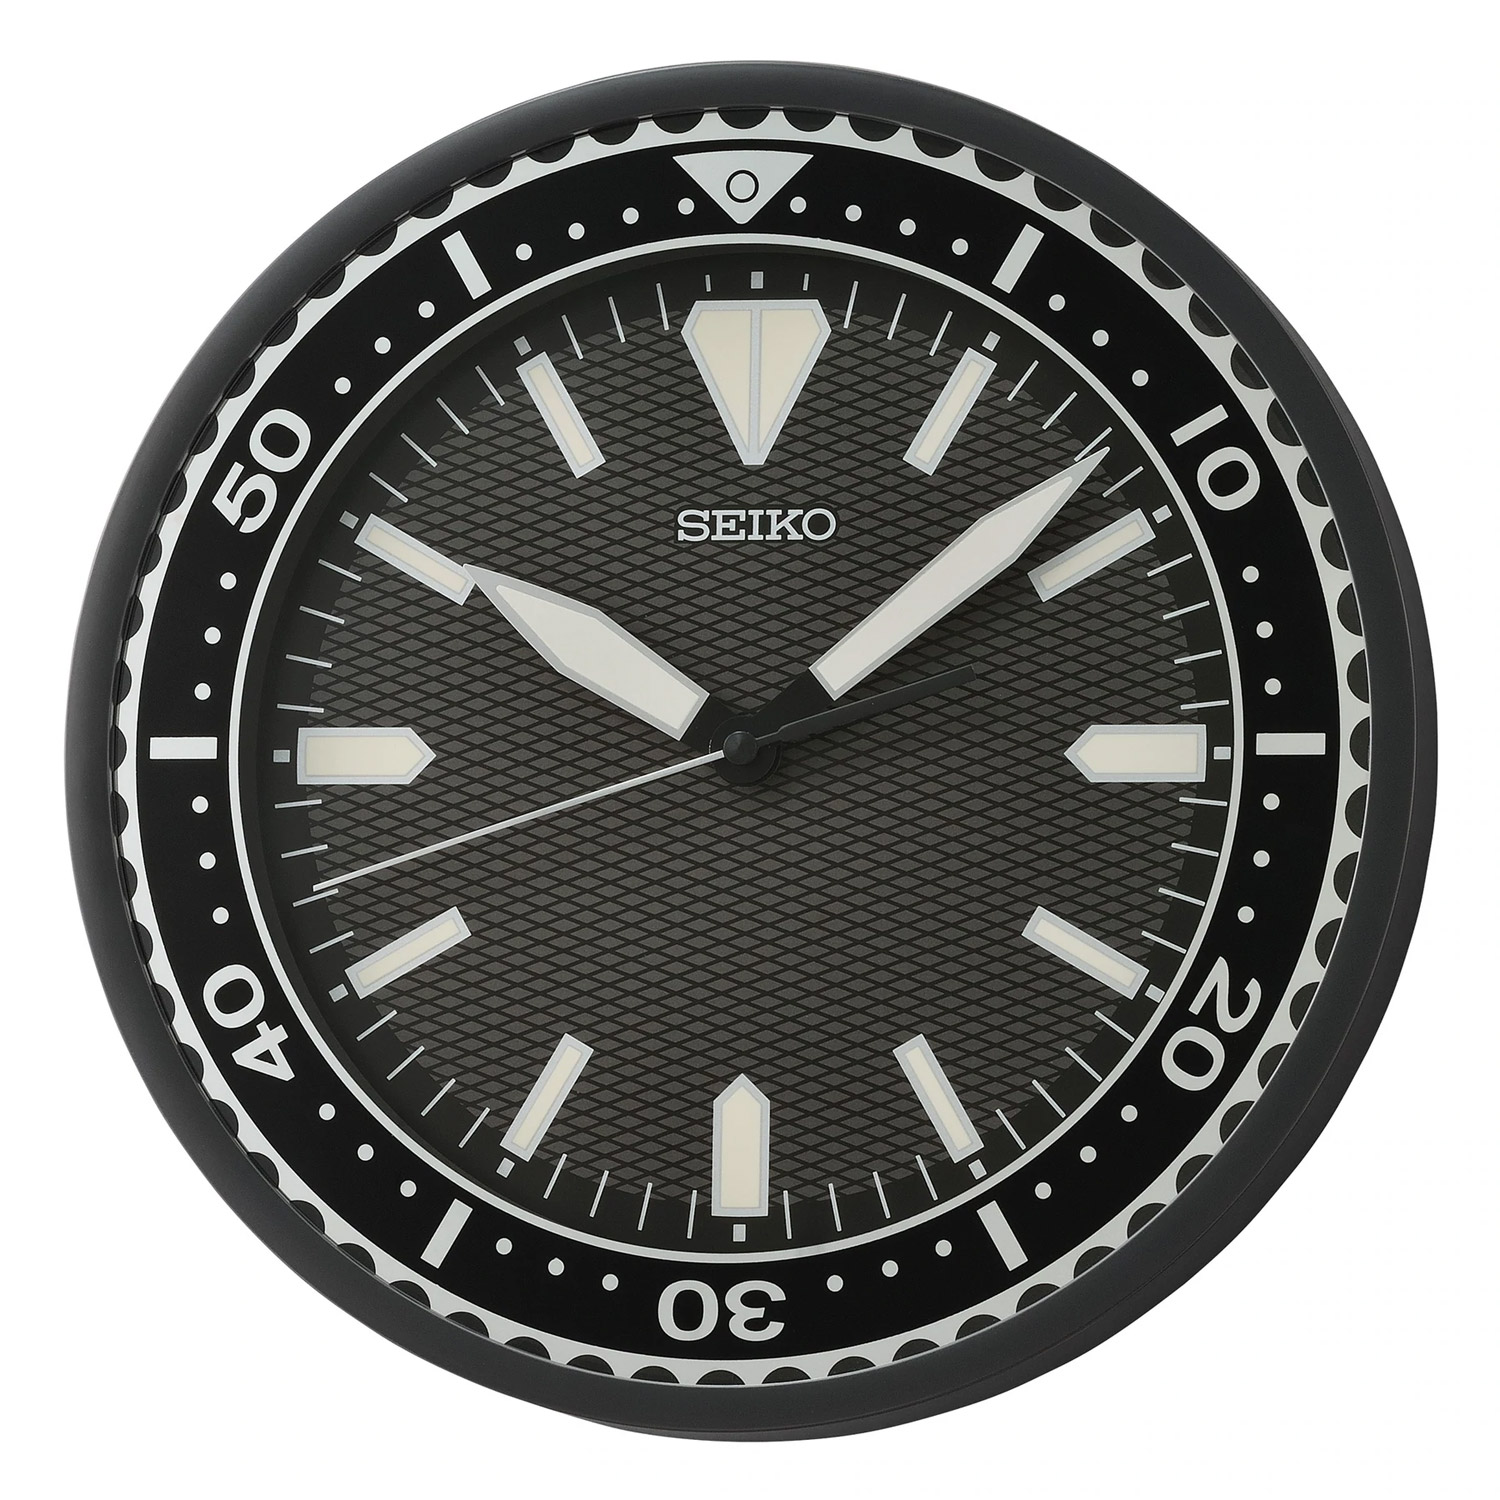 Buy Seiko Wall Clocks now at low prices • uhrcenter Shop